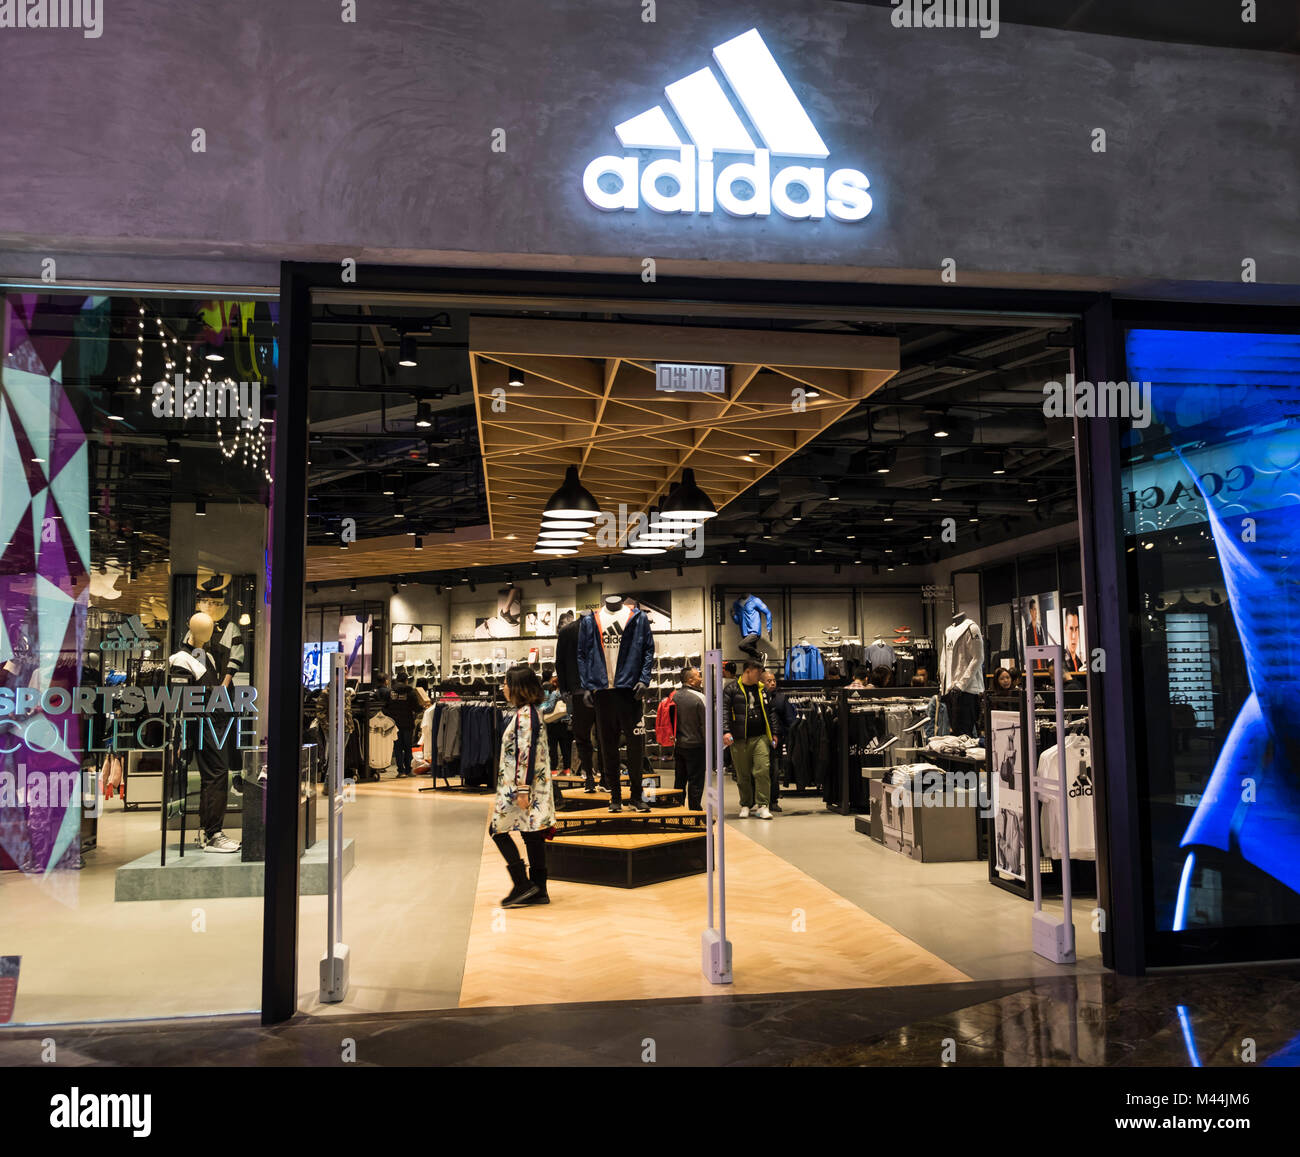 adidas store guildford